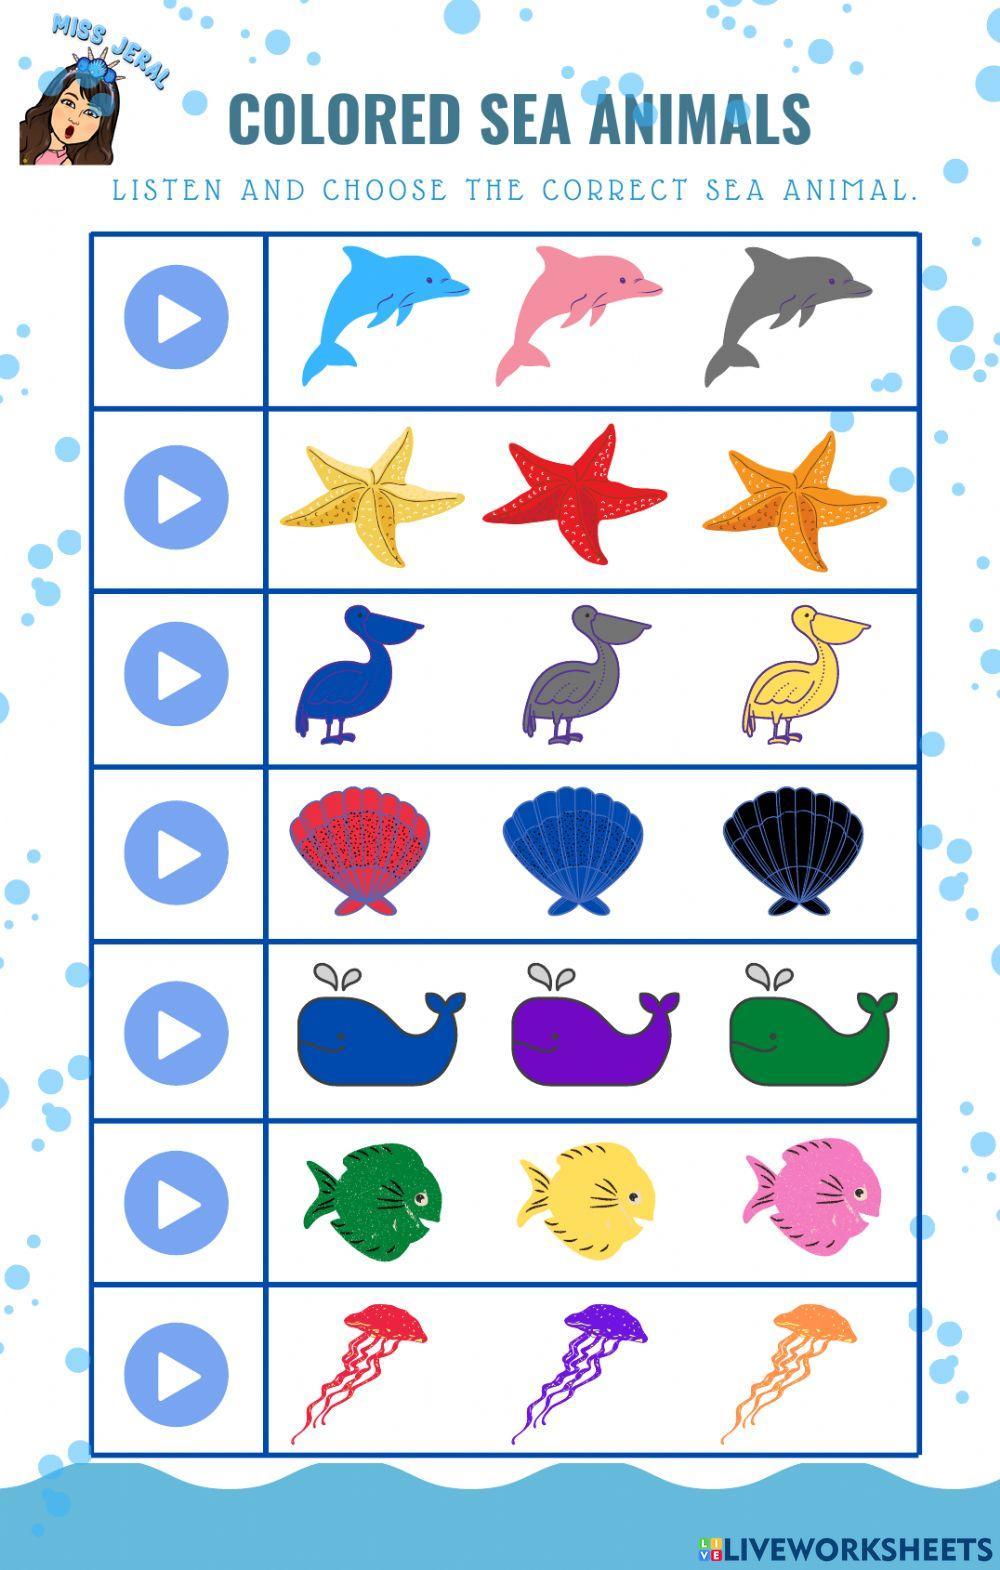 Review Sea animals